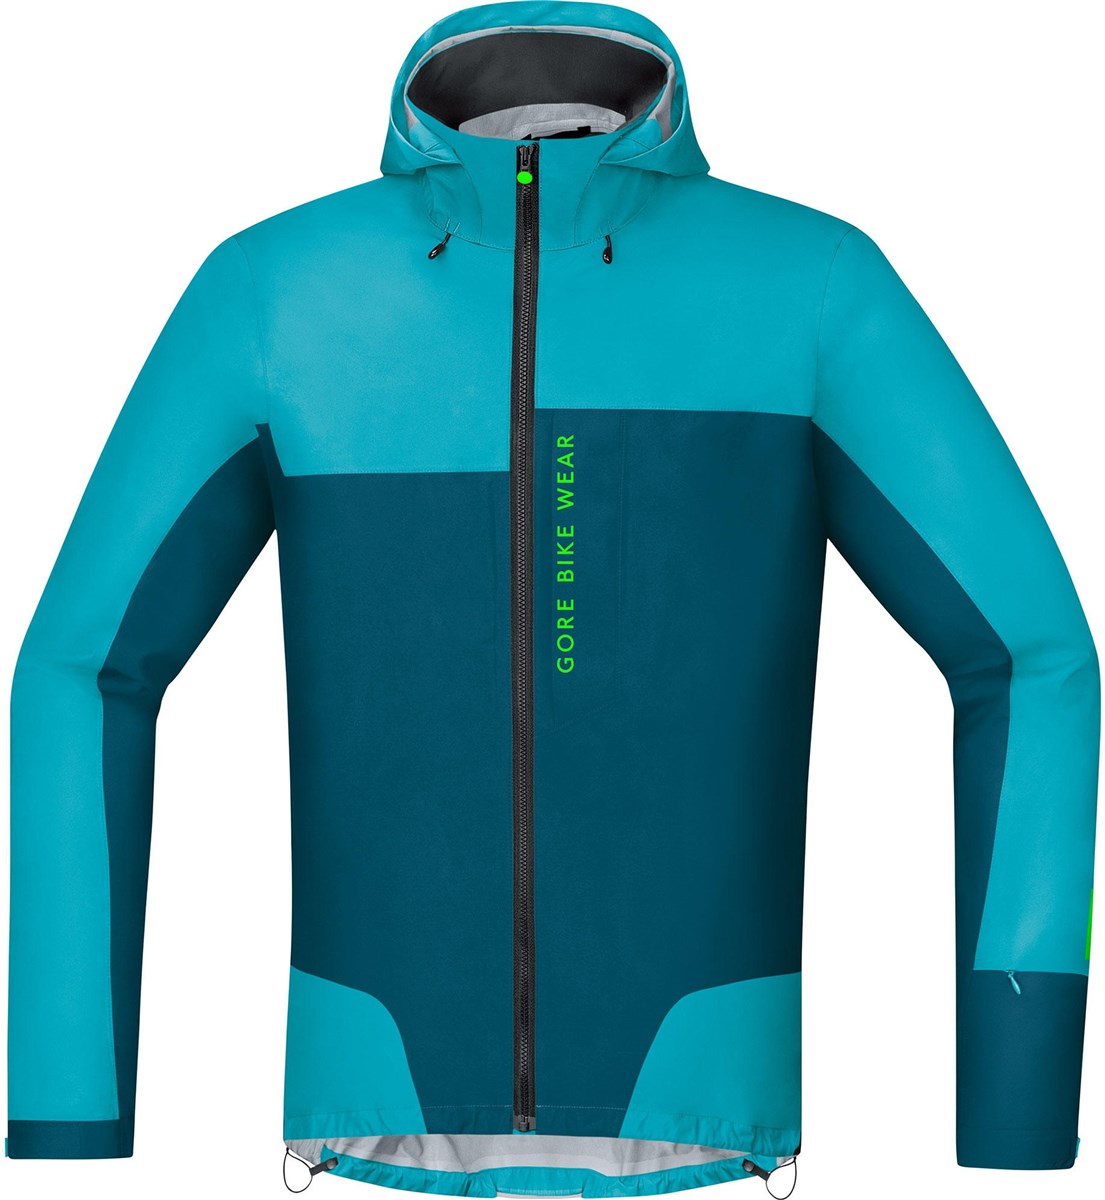 Gore Power Trail Gore-Tex Active Jacket SS17 product image